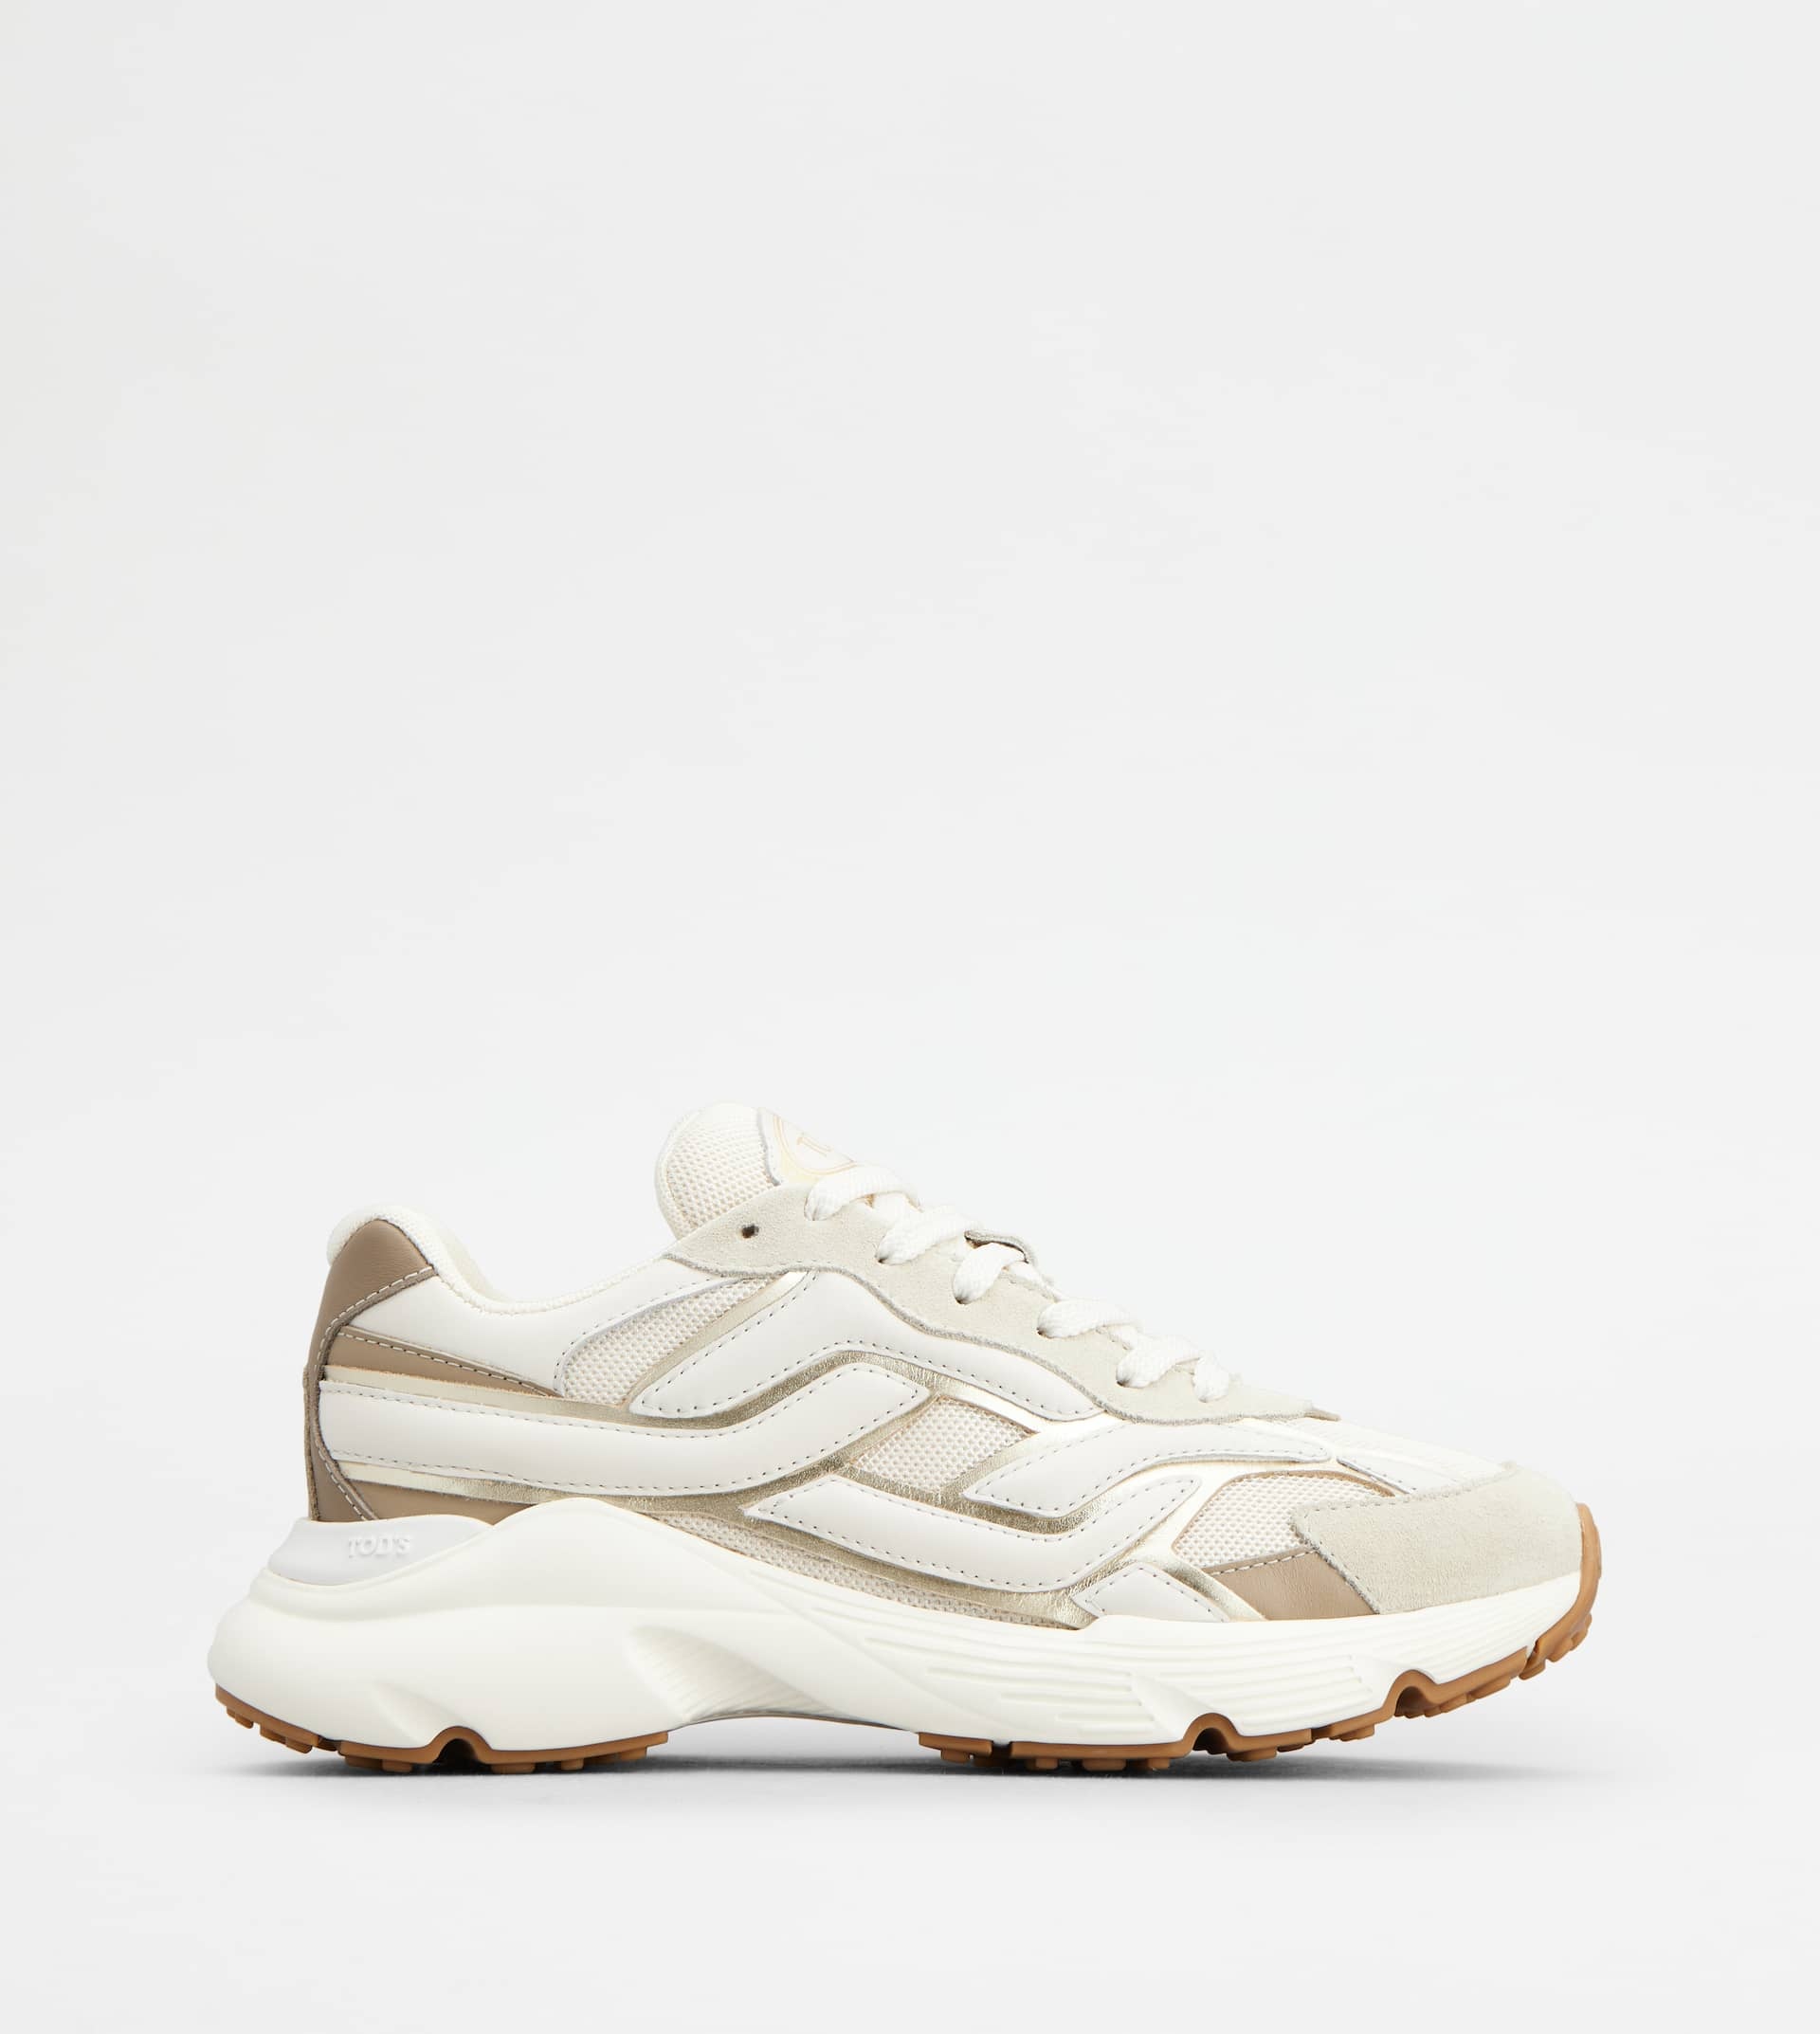 SNEAKERS IN LEATHER AND FABRIC - BEIGE, WHITE, GOLD - 1